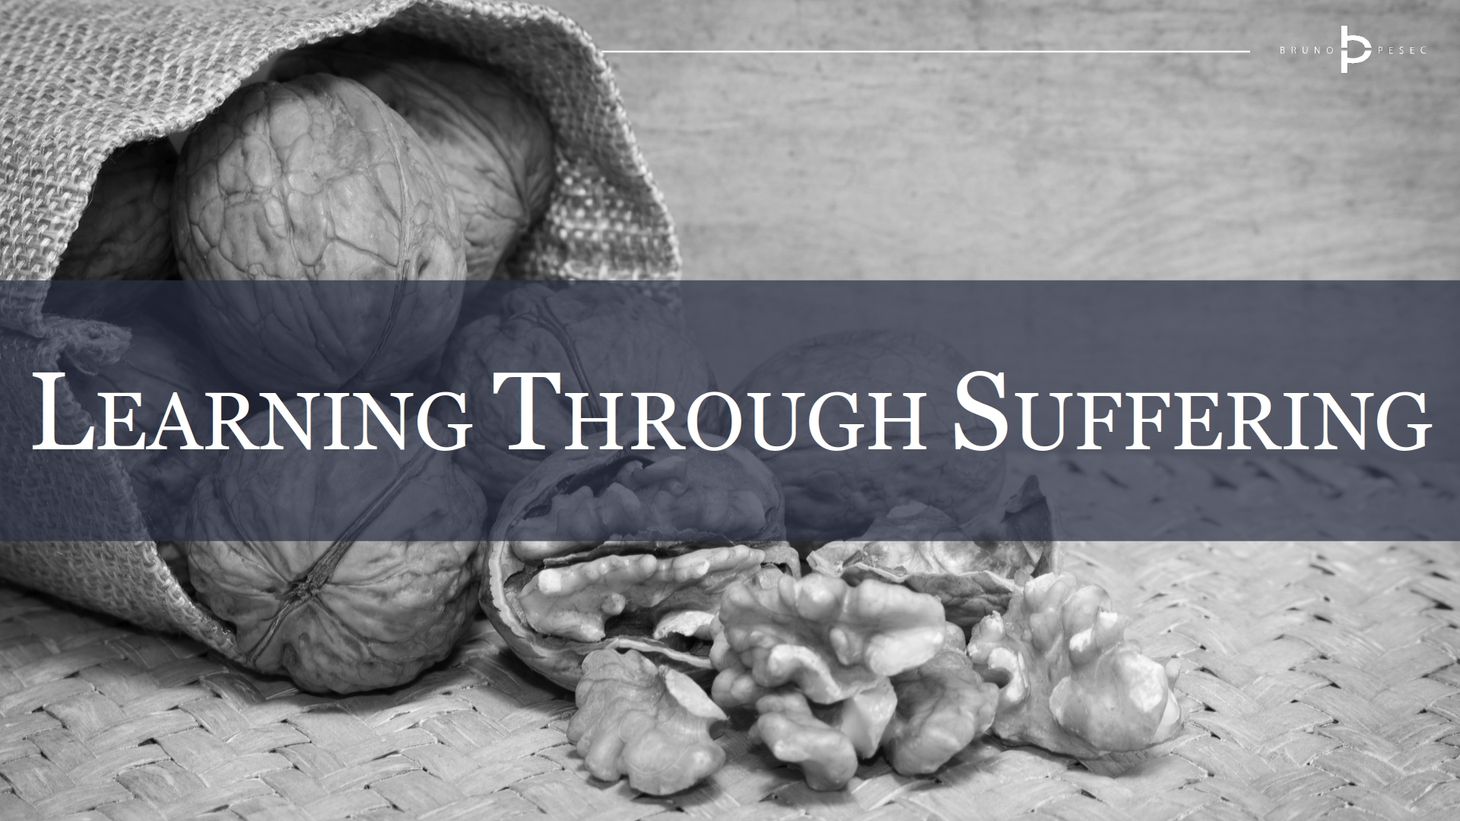 Learning through suffering